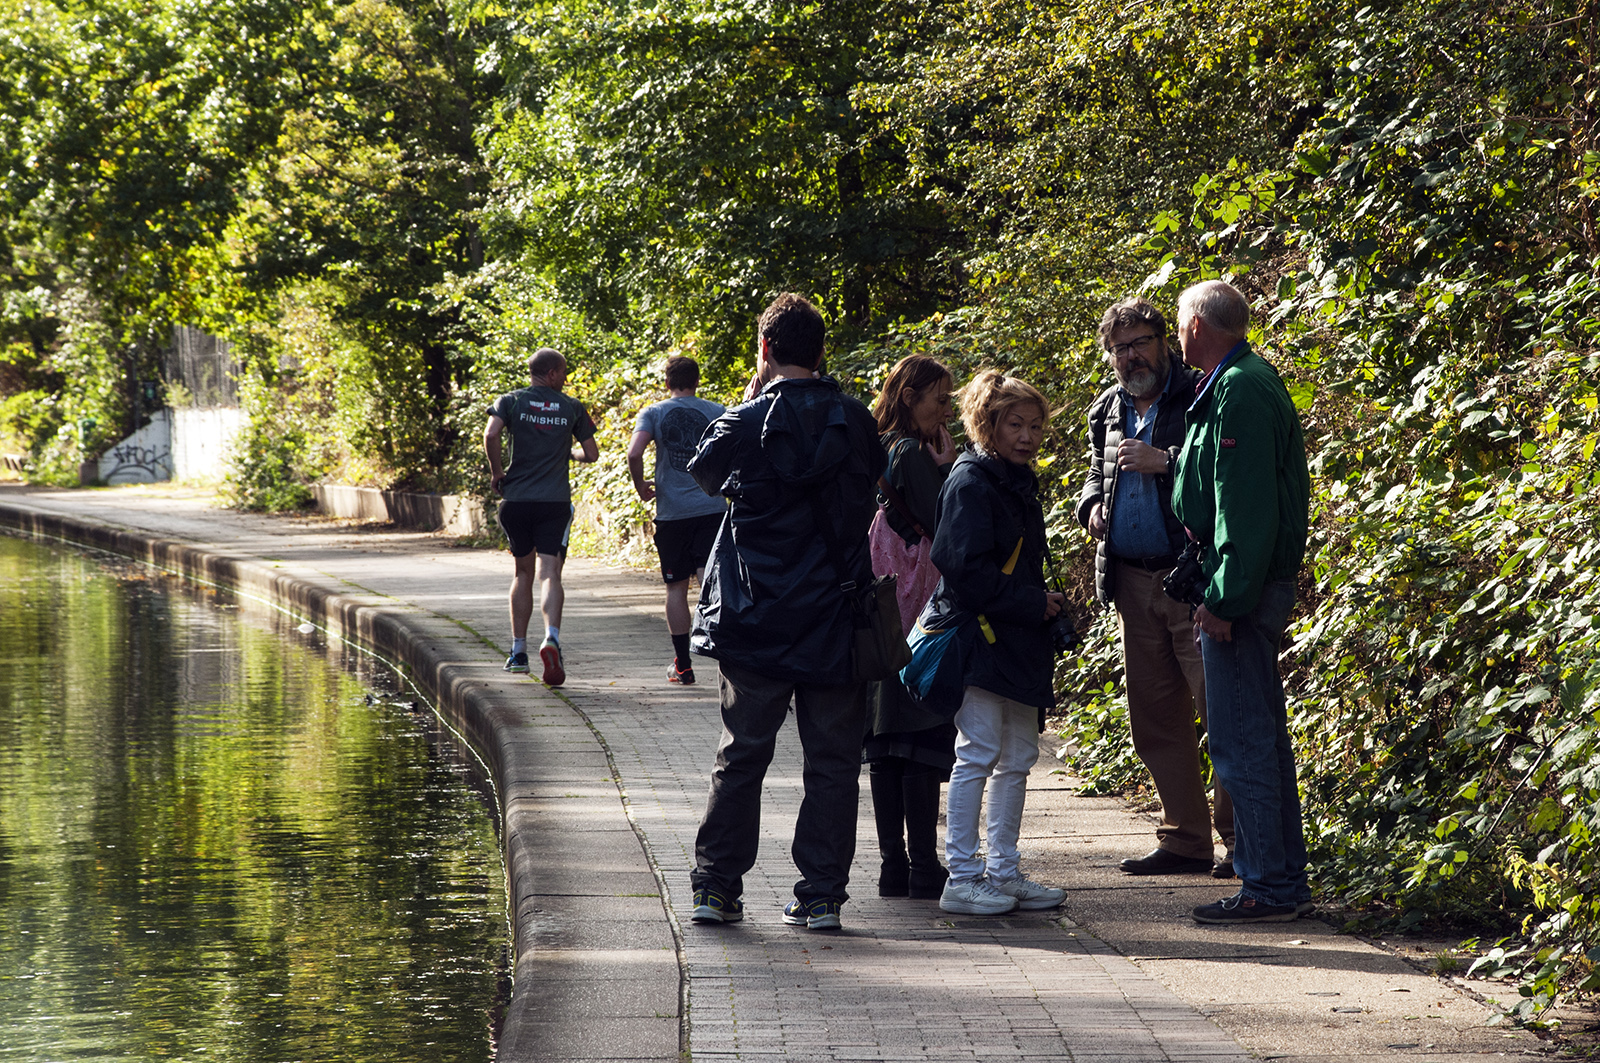 2016-10-18-Camden_Regents-Canal_Autumn_People-Breathing-Londoners-with-Geoff-Nicholson